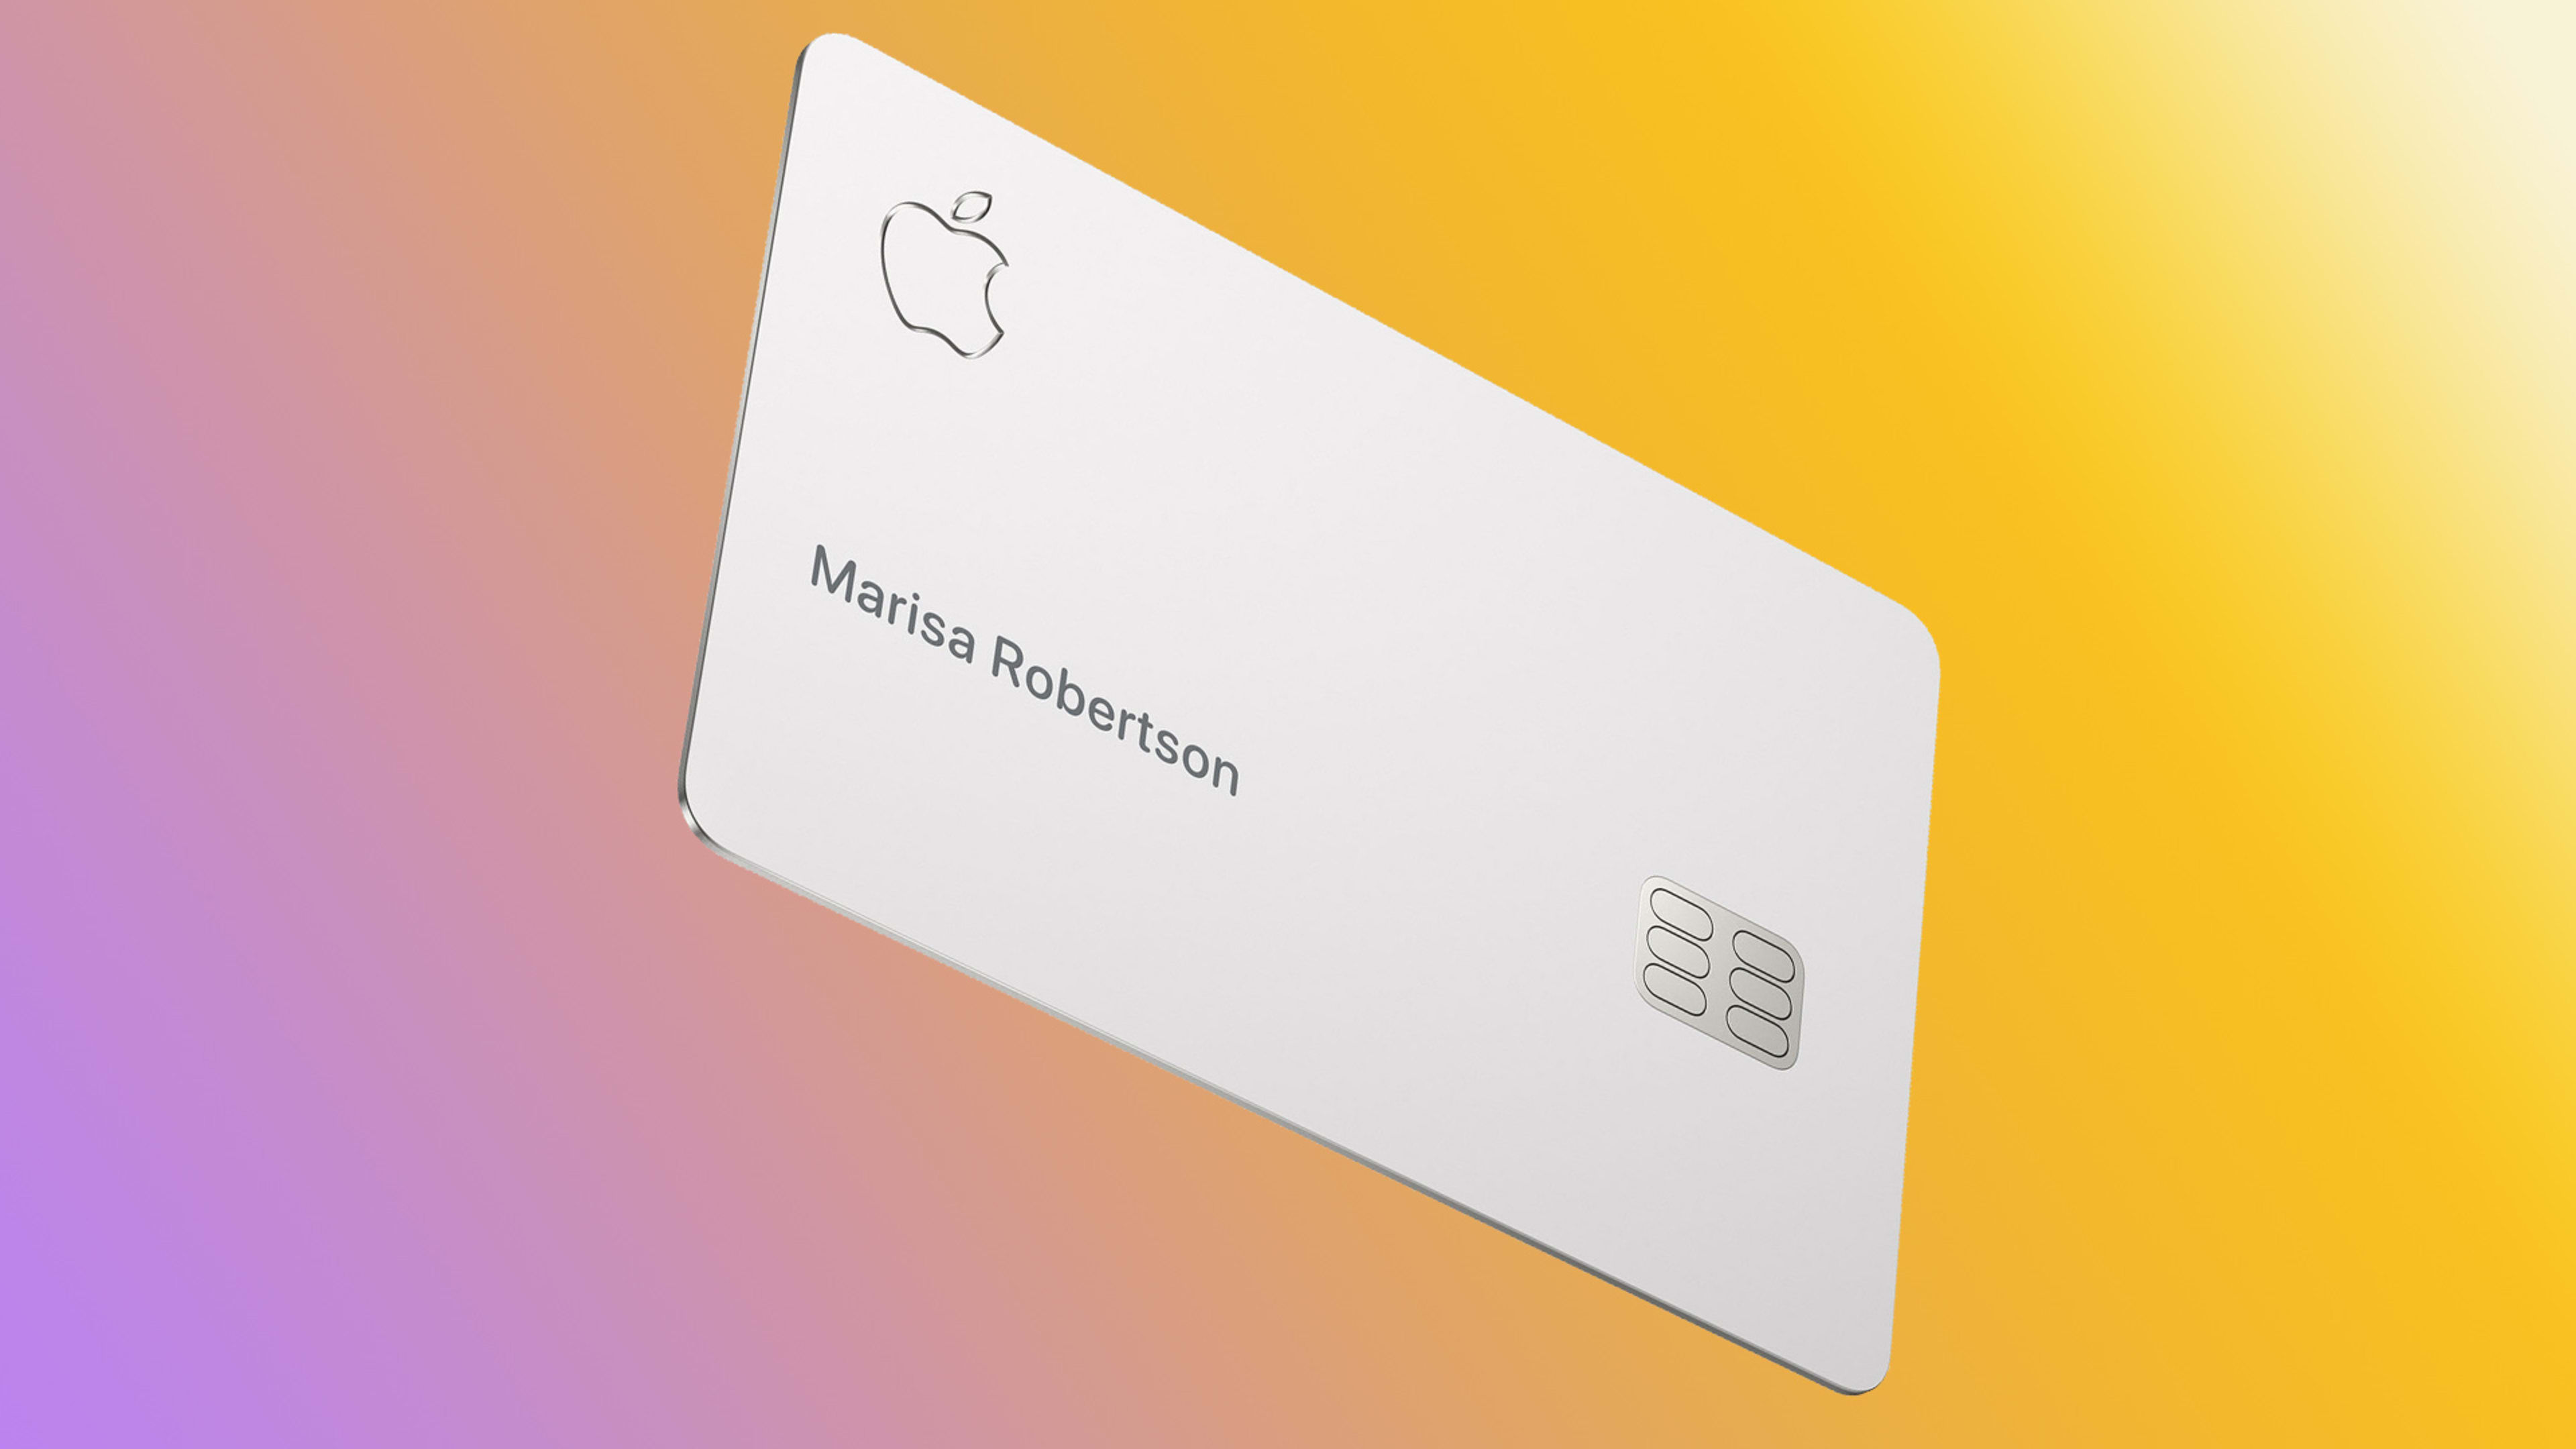 Apple redesigned the credit card. Can it redesign debt?